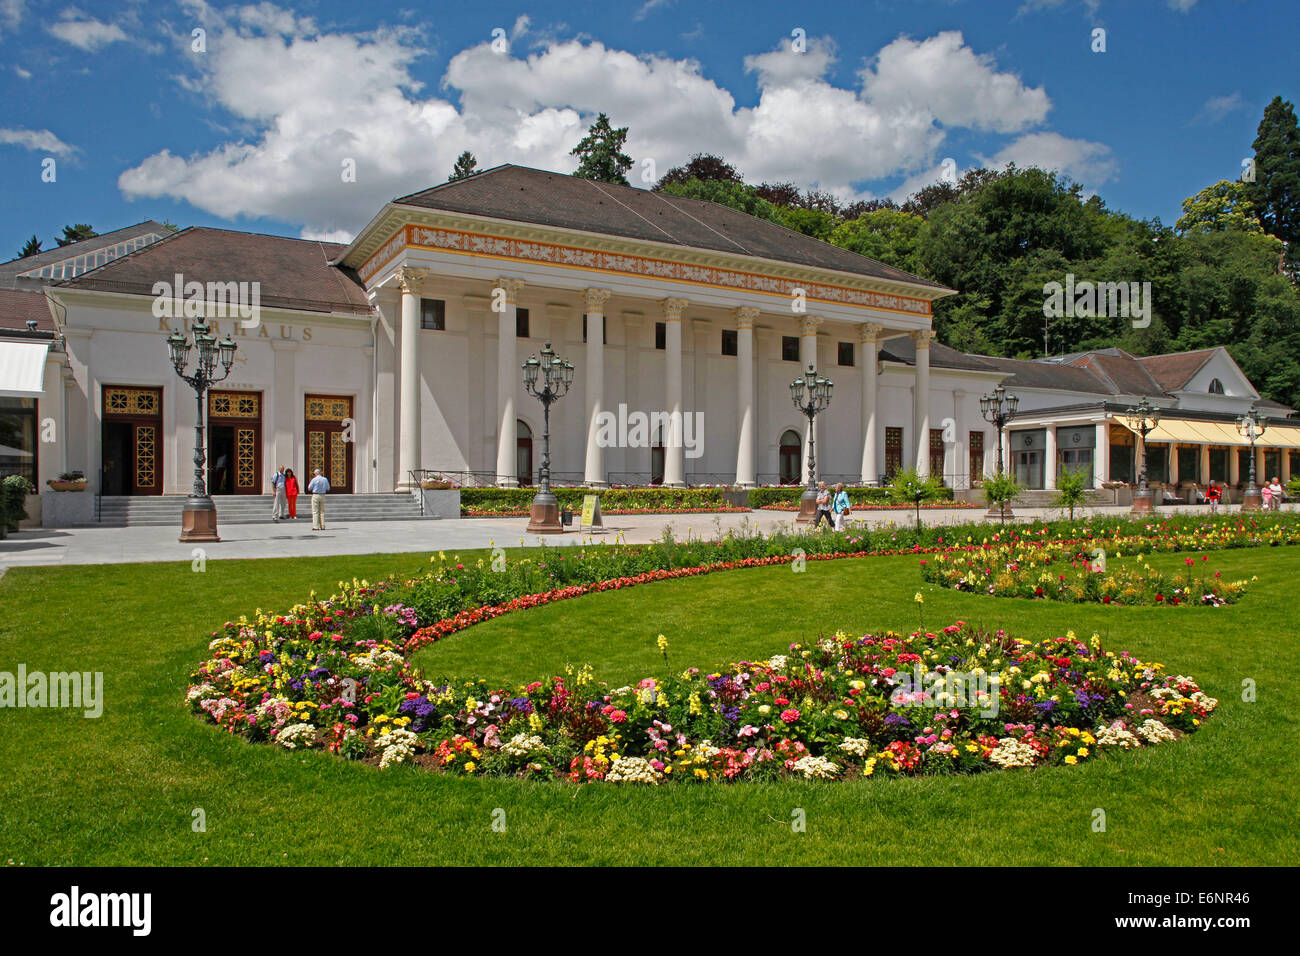 Assembly rooms at the health resort of Baden-Baden, Baden-Wuerttemberg, Germany, The Kurhaus is a spa resort, casino, and conference complex in Baden-Baden, Germany in the outskirts of the Black Forest (Schwarzwald). The main structure was designed in 1824 Stock Photo